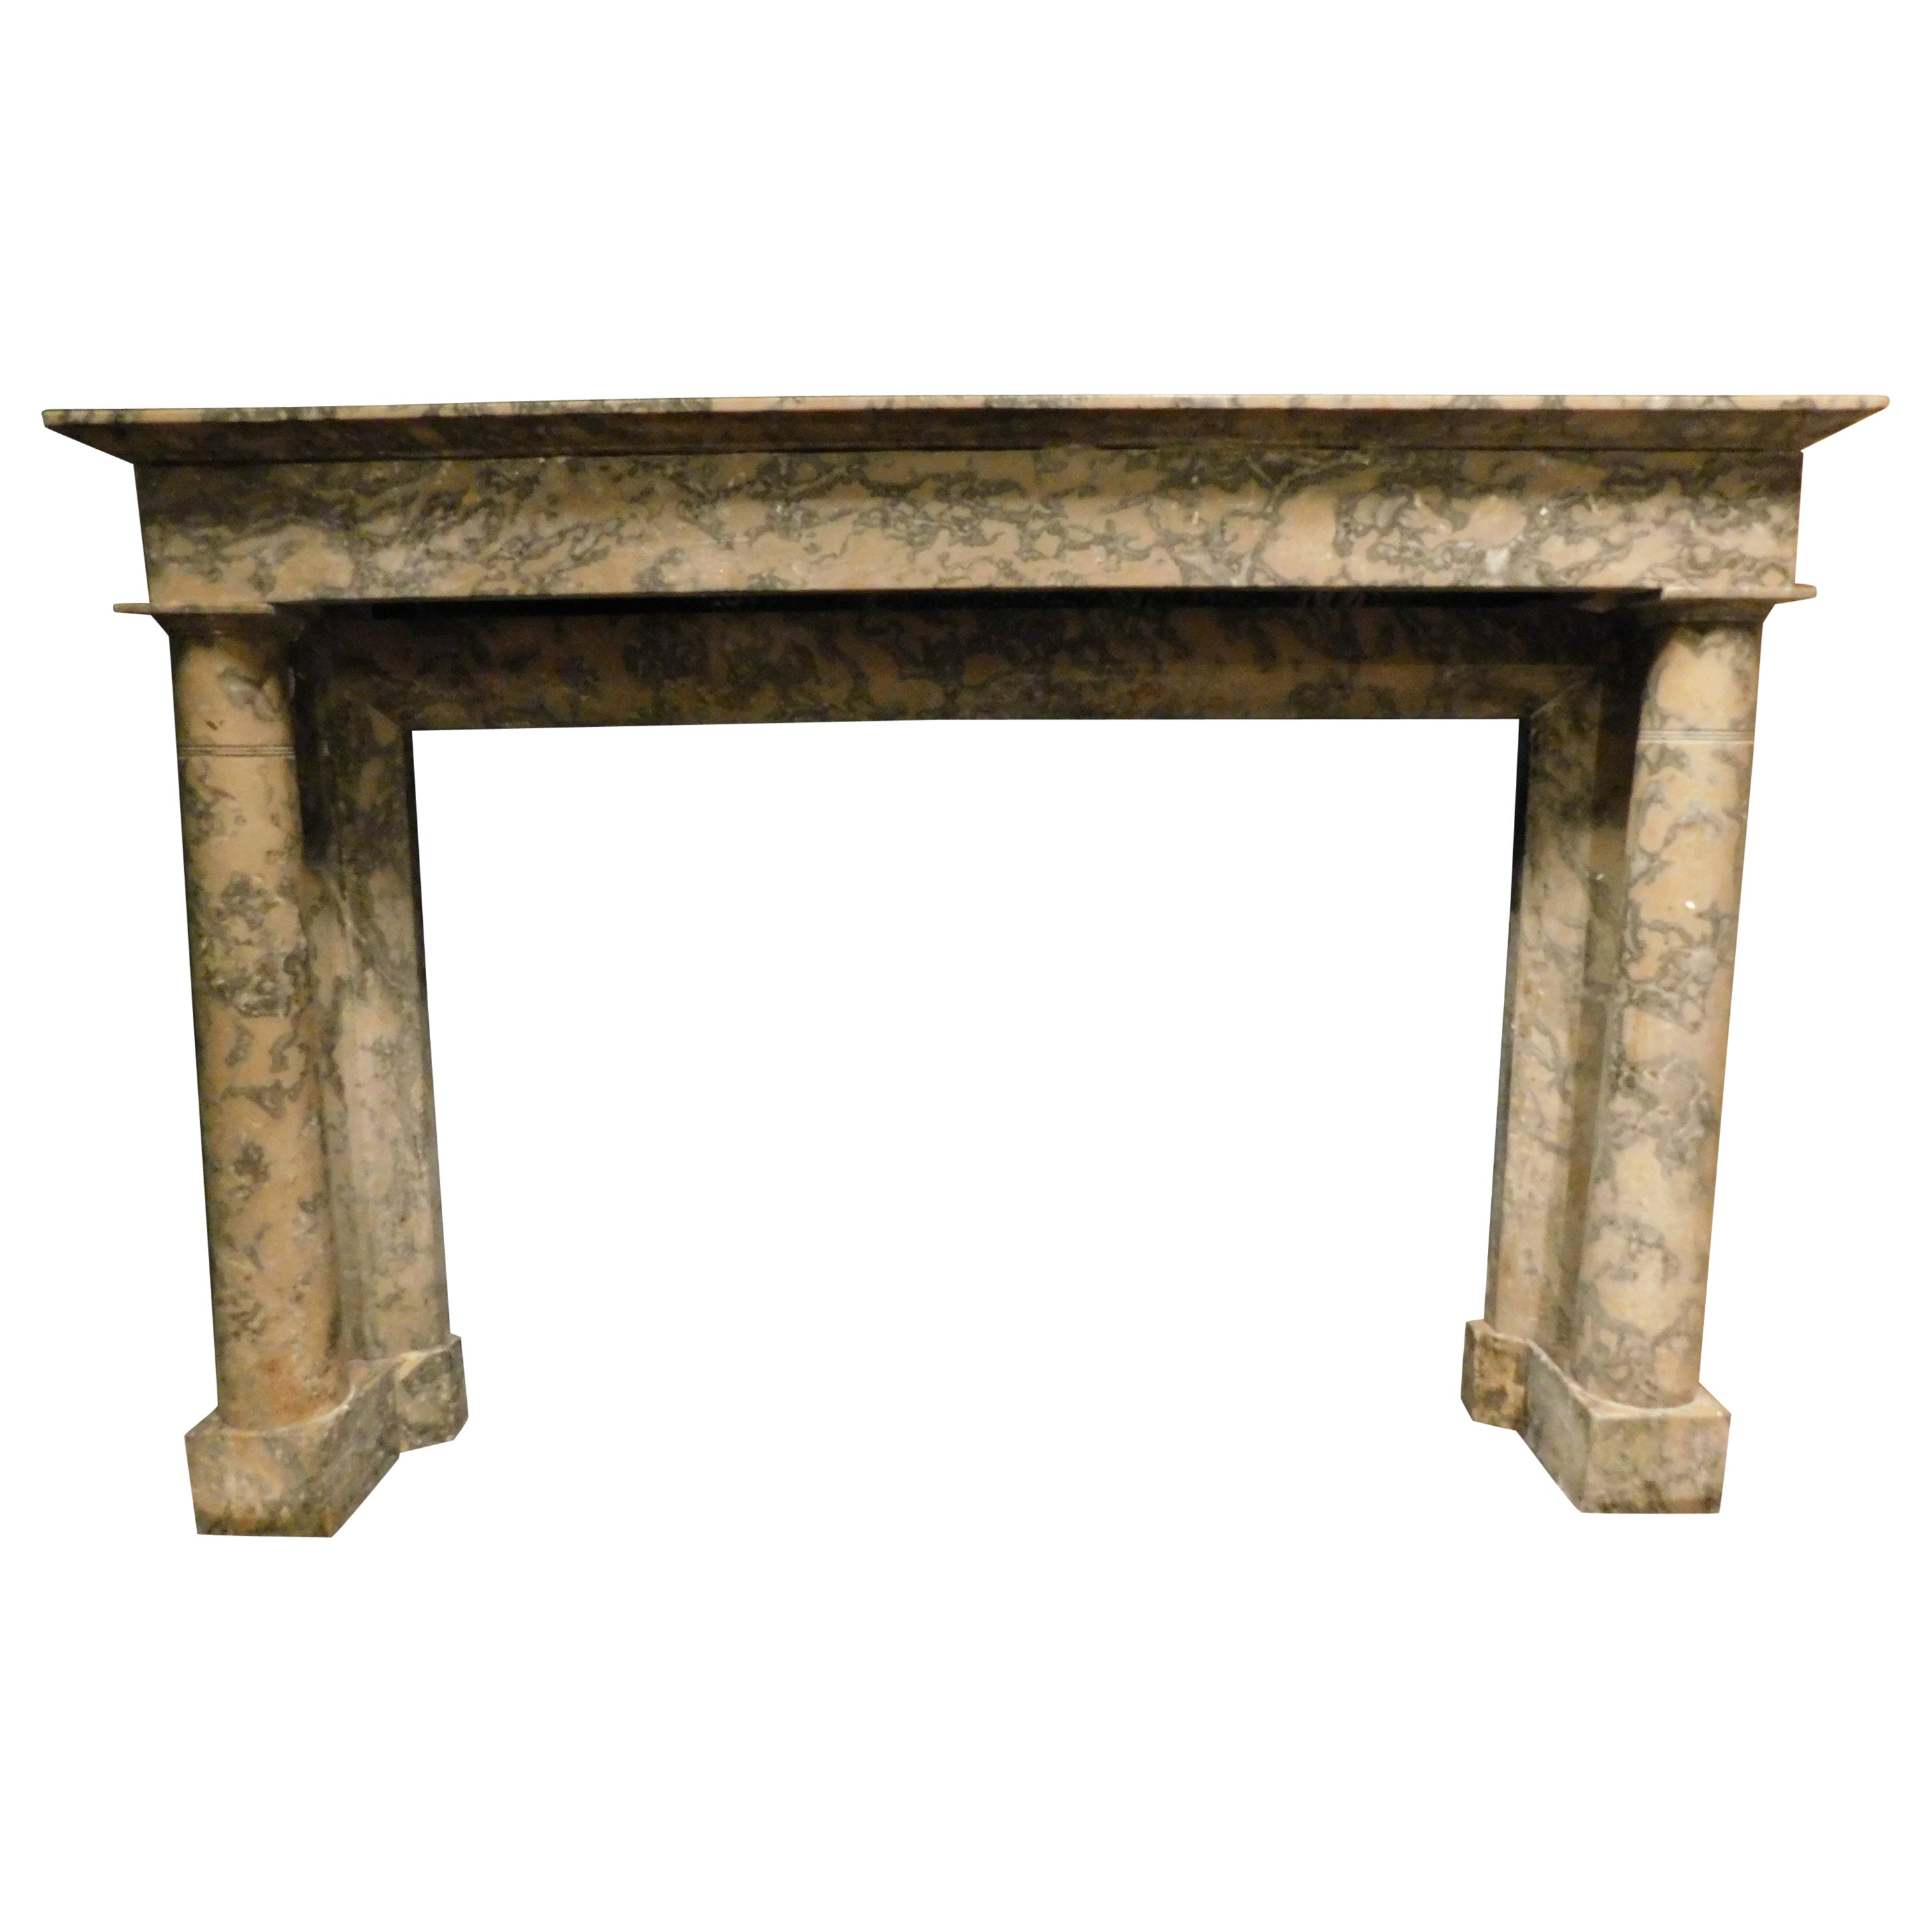 Antique Fireplace Mantle Empire Style, First Half of the 19th Century, Italy